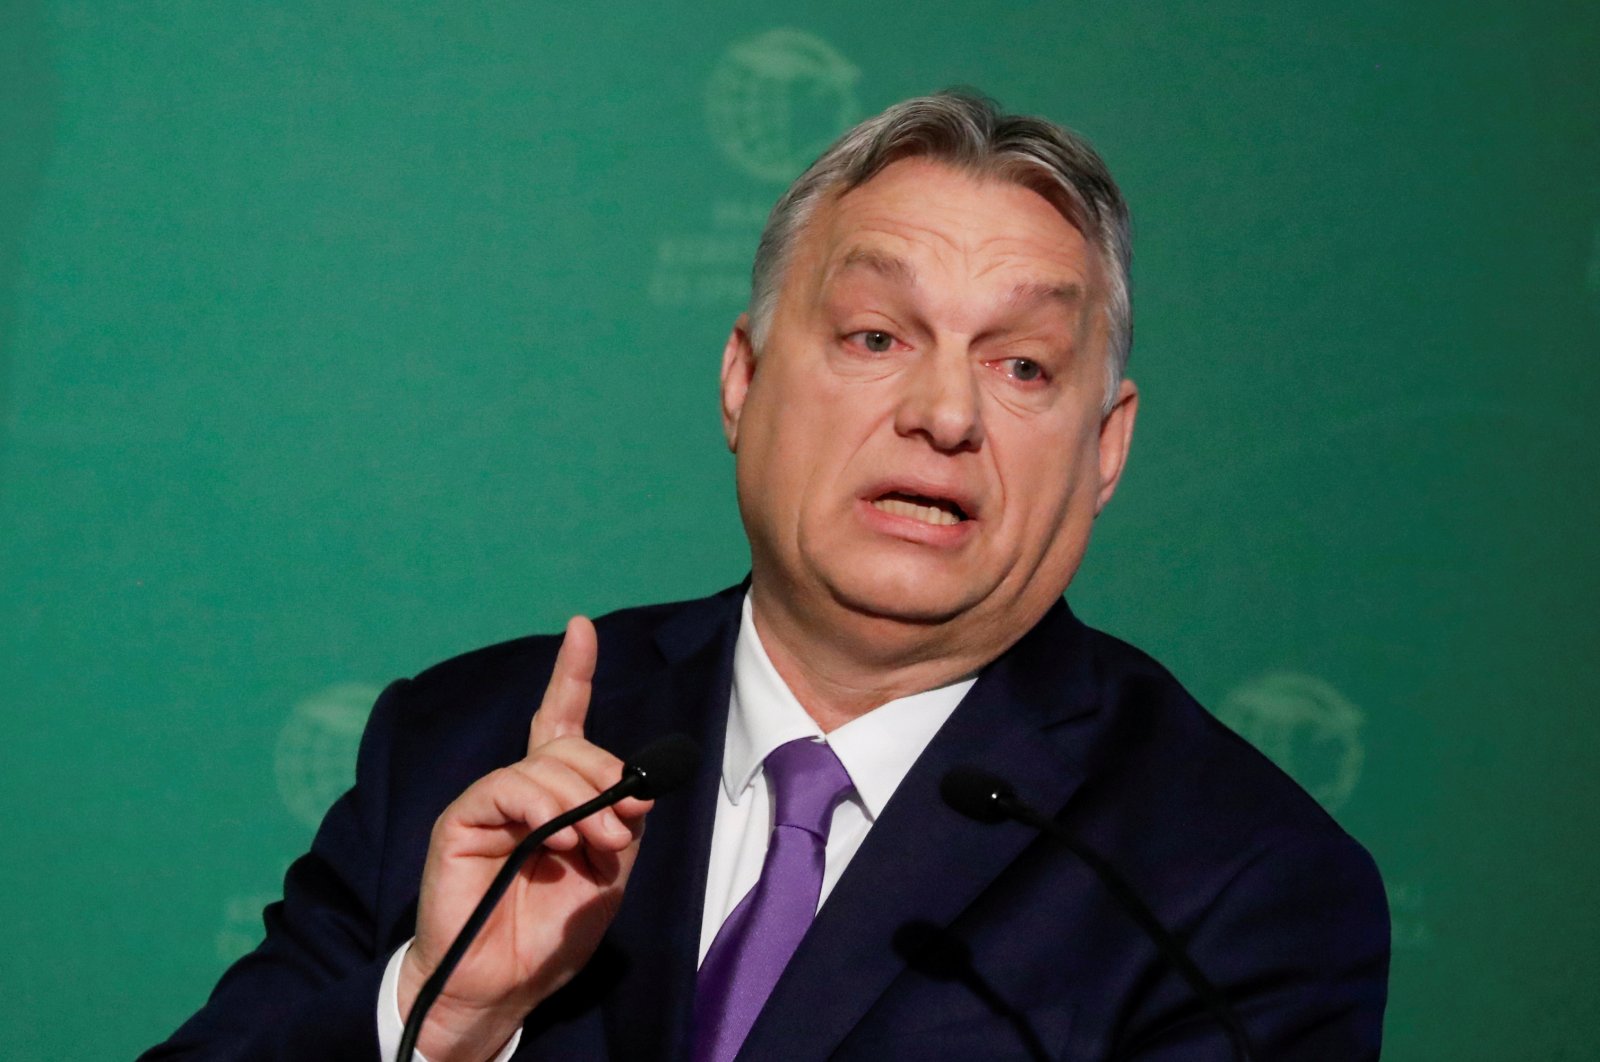 Hungarian Prime Minister Viktor Orban speaks during a business conference in Budapest, Hungary, March 10, 2020. (Reuters Photo)